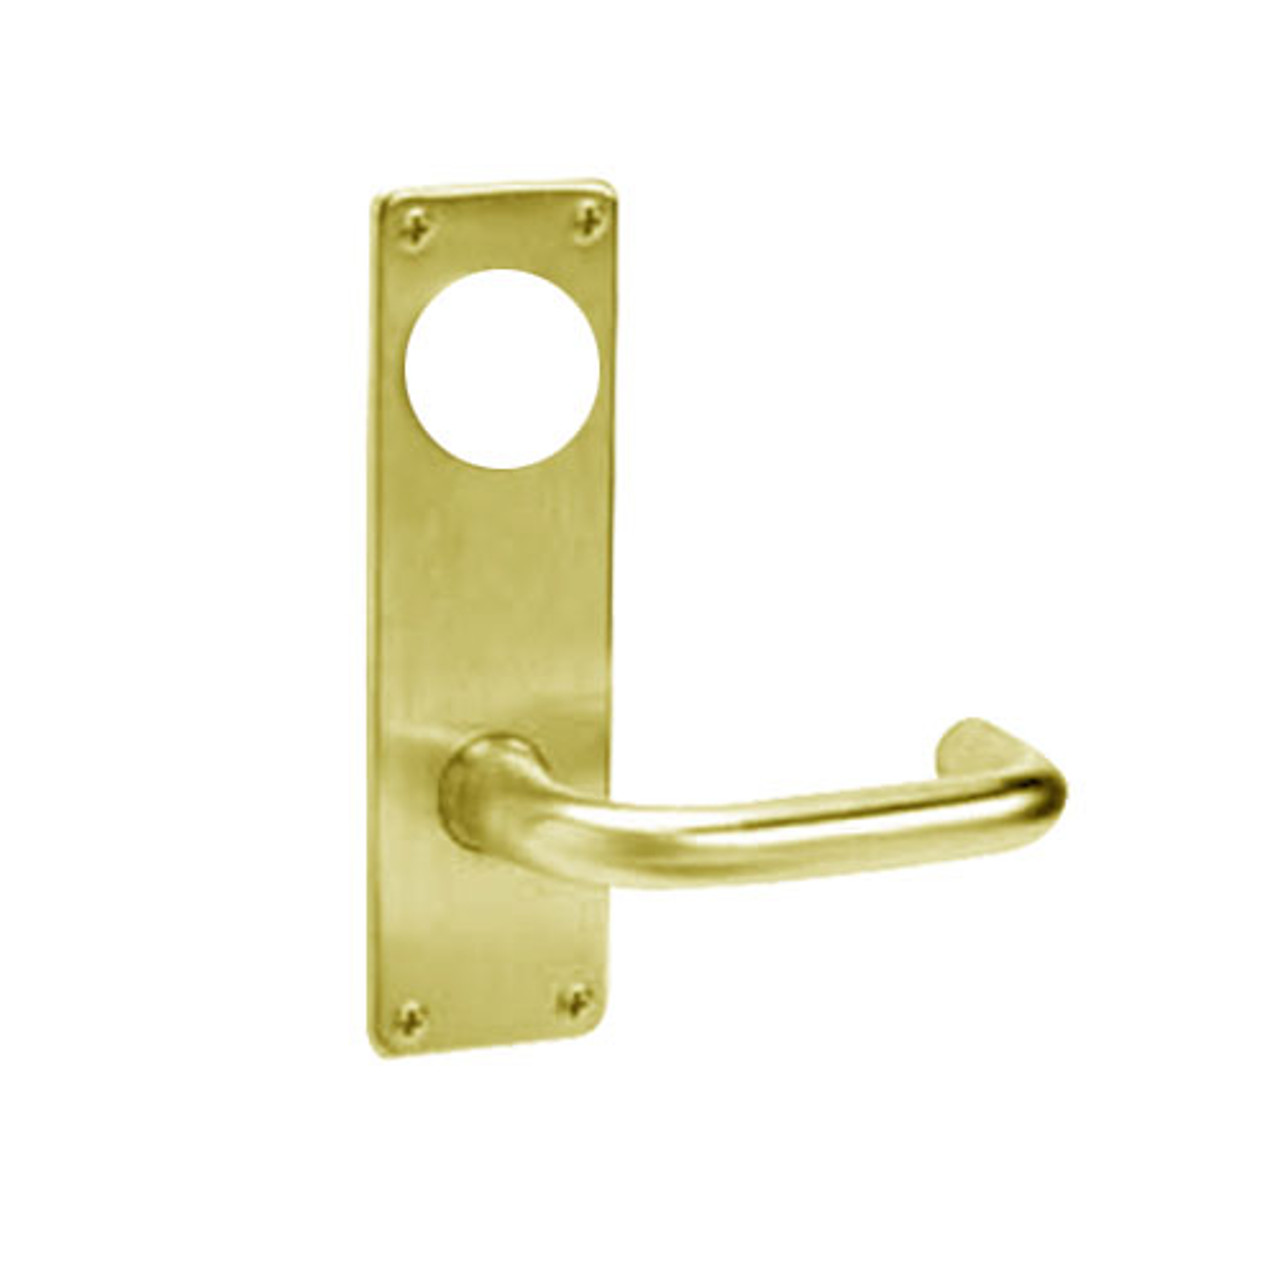 ML2065-LSN-605-M31 Corbin Russwin ML2000 Series Mortise Dormitory Trim Pack with Lustra Lever in Bright Brass